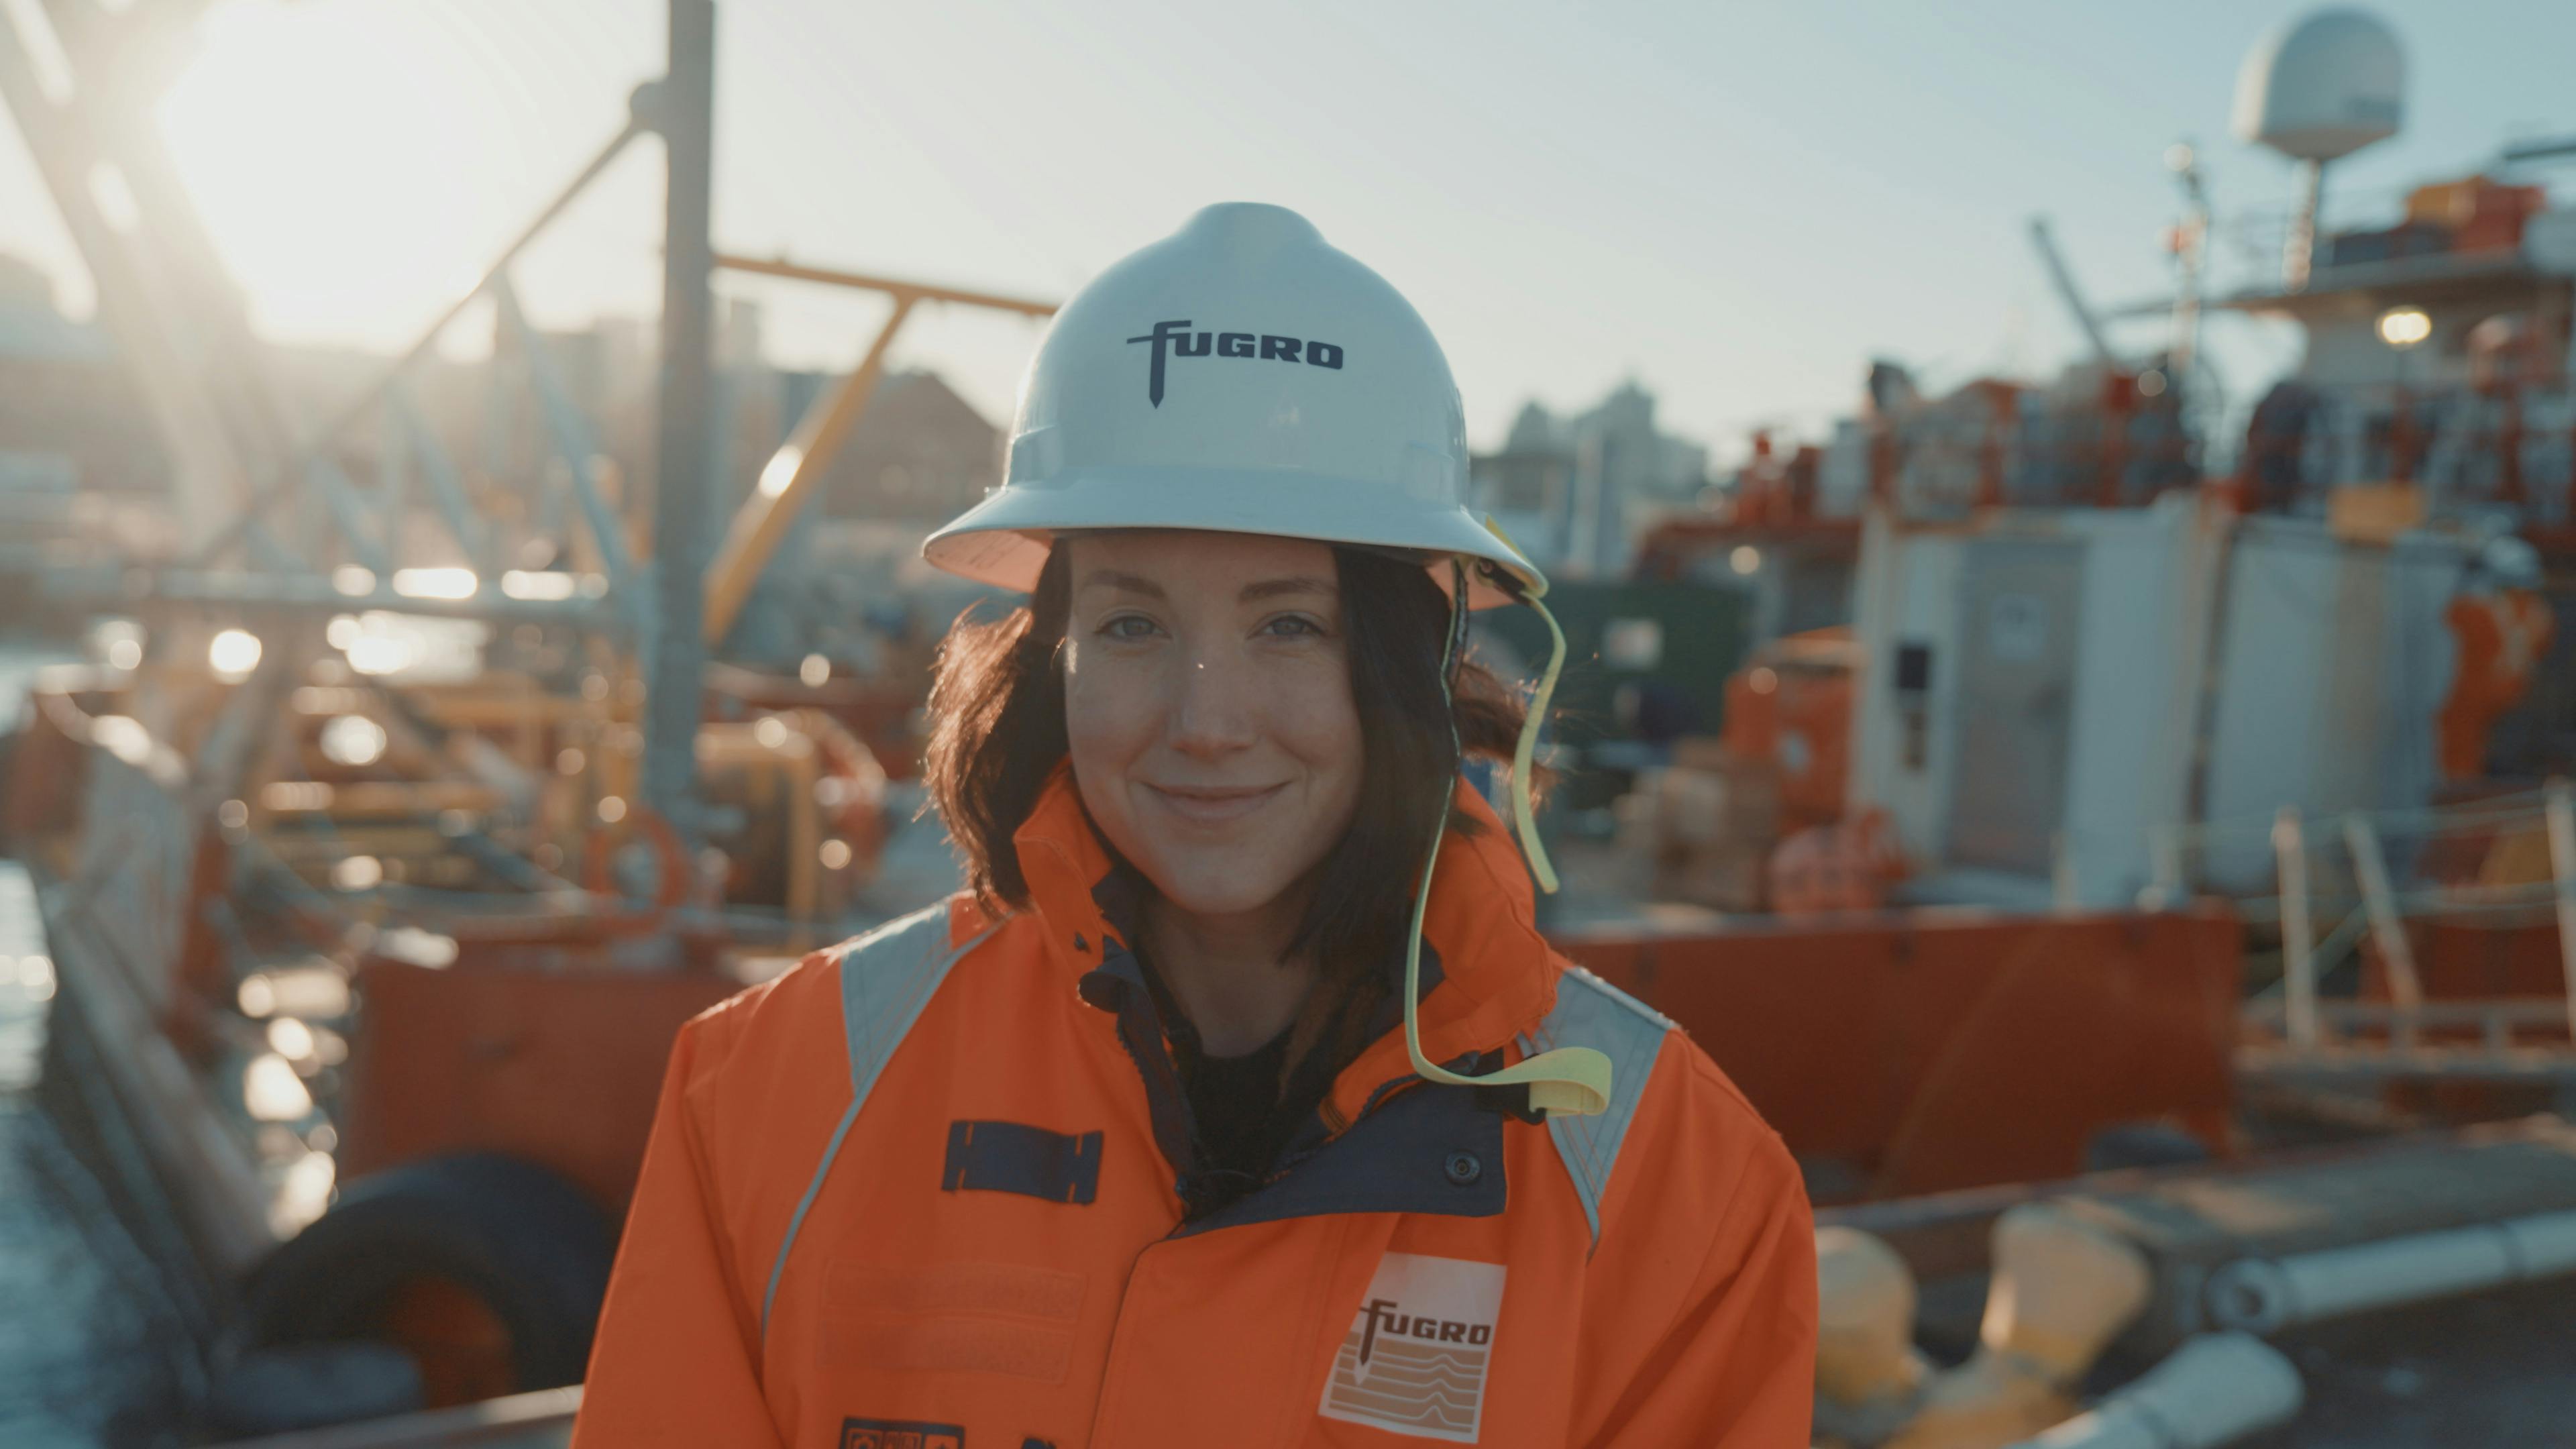 Project 'Faces of Fugro', for recruitment purposes.
If you wish to use any of these hero photo's, please contact:
Robert Spence - r.spence@fugro.com
or Lisette Blankestijn - l.blankestijn@fugro.com